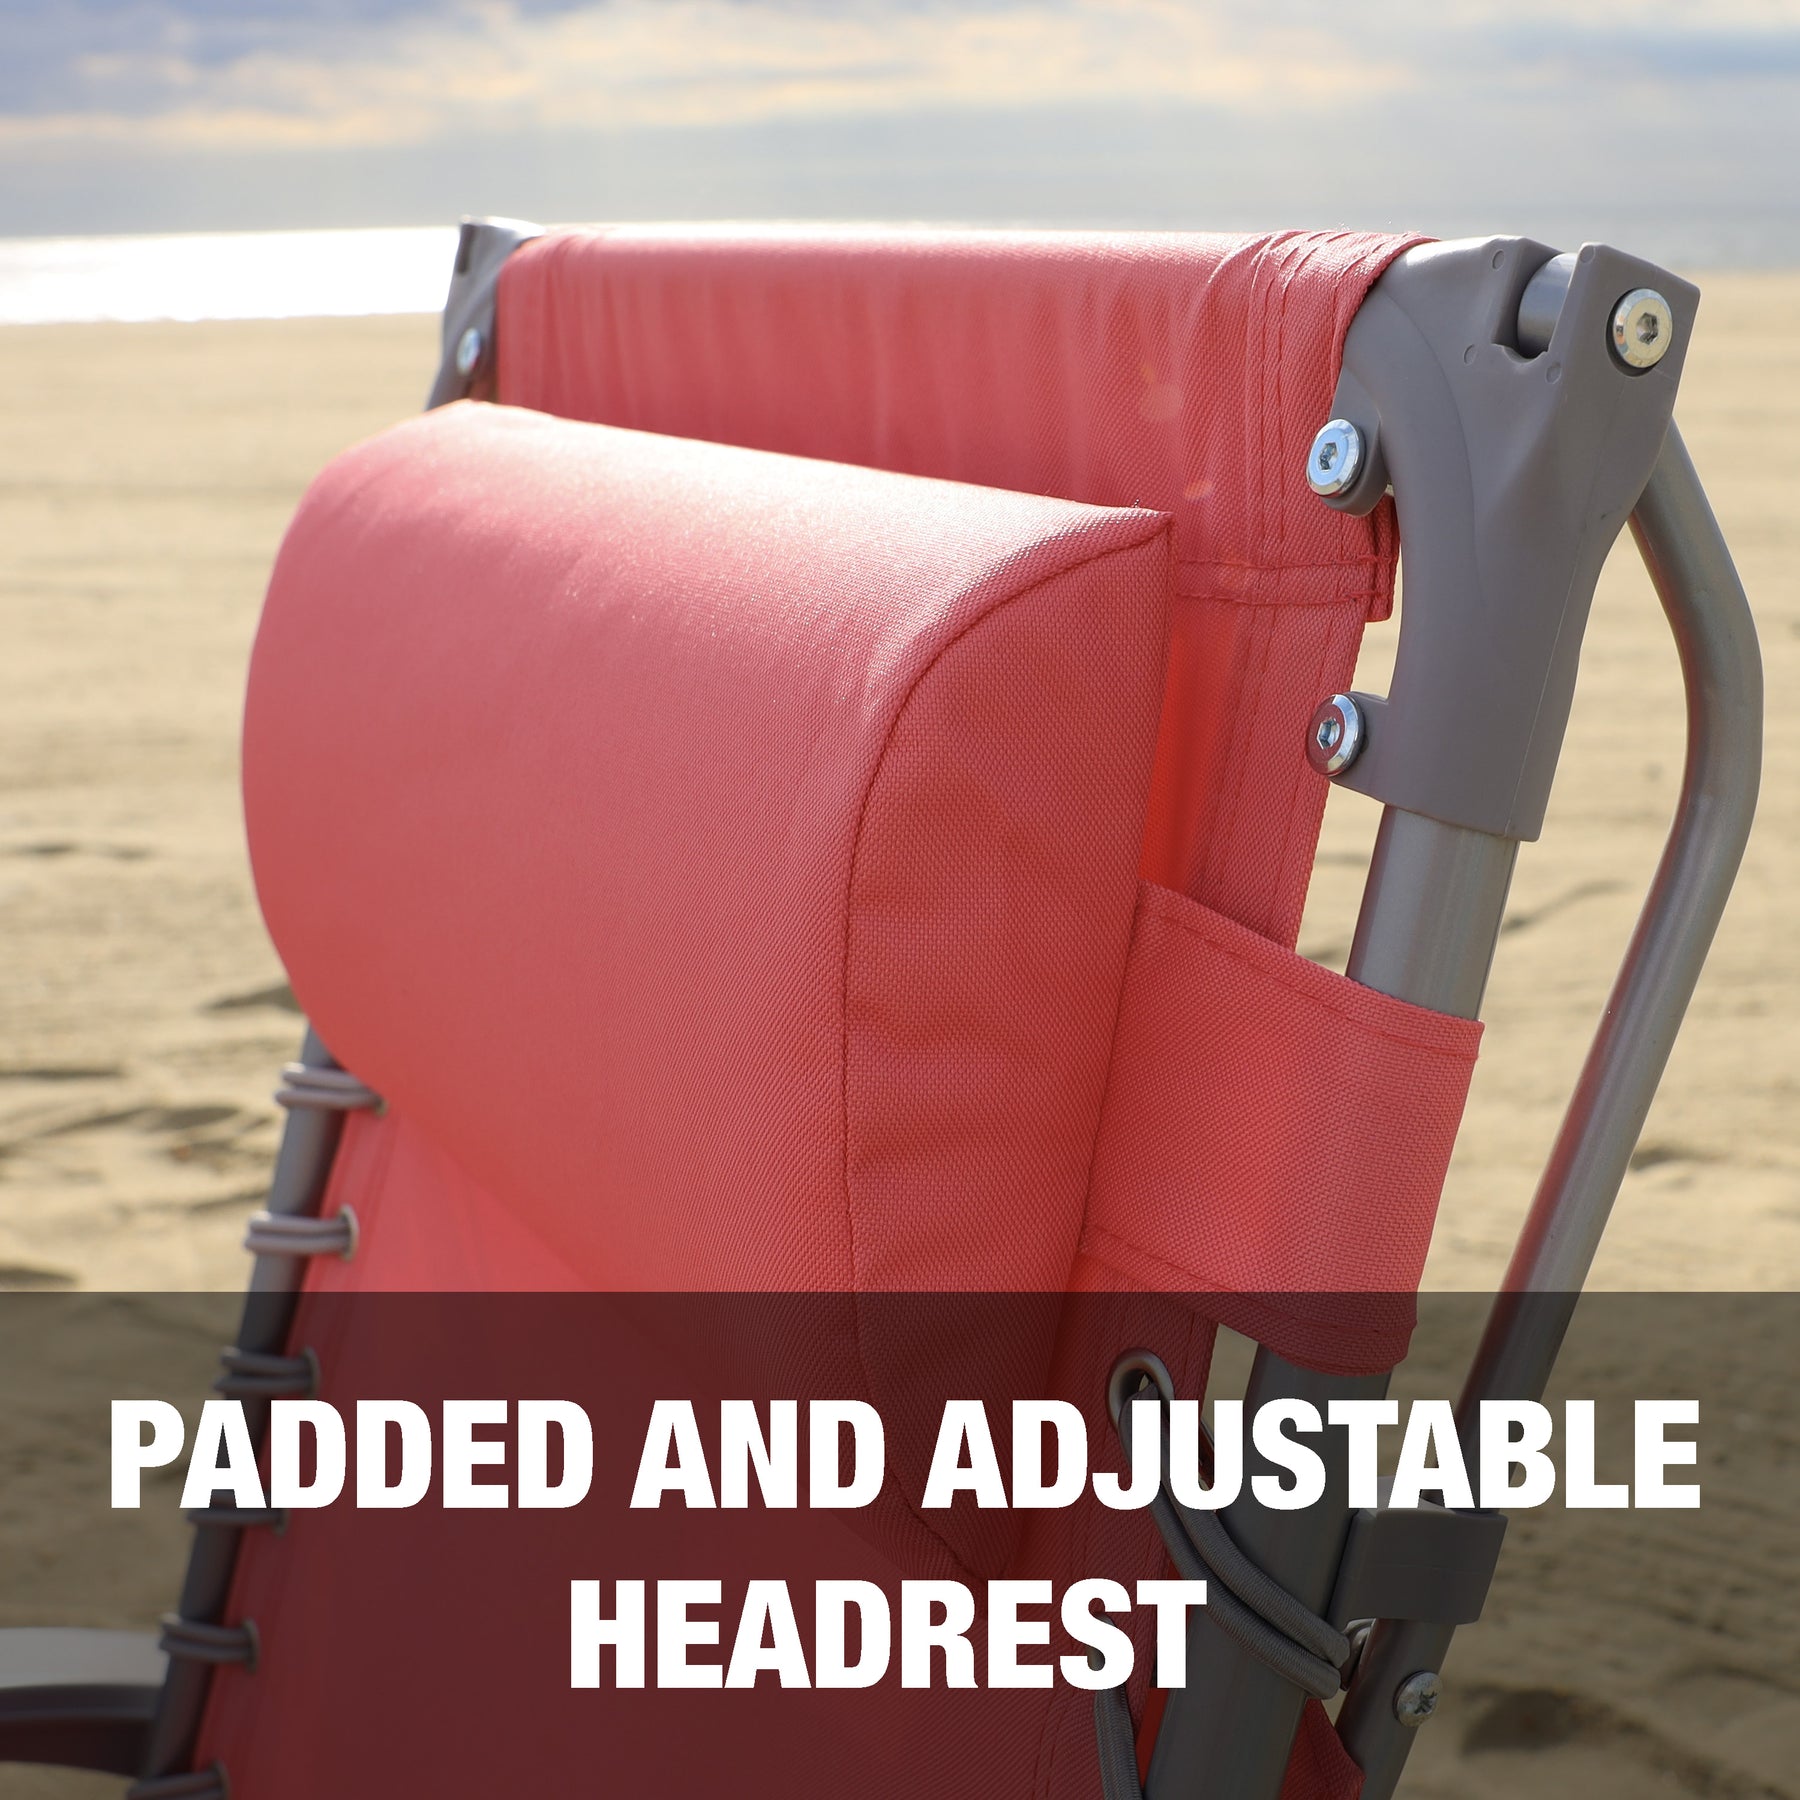 Features a padded and adjustable headrest.